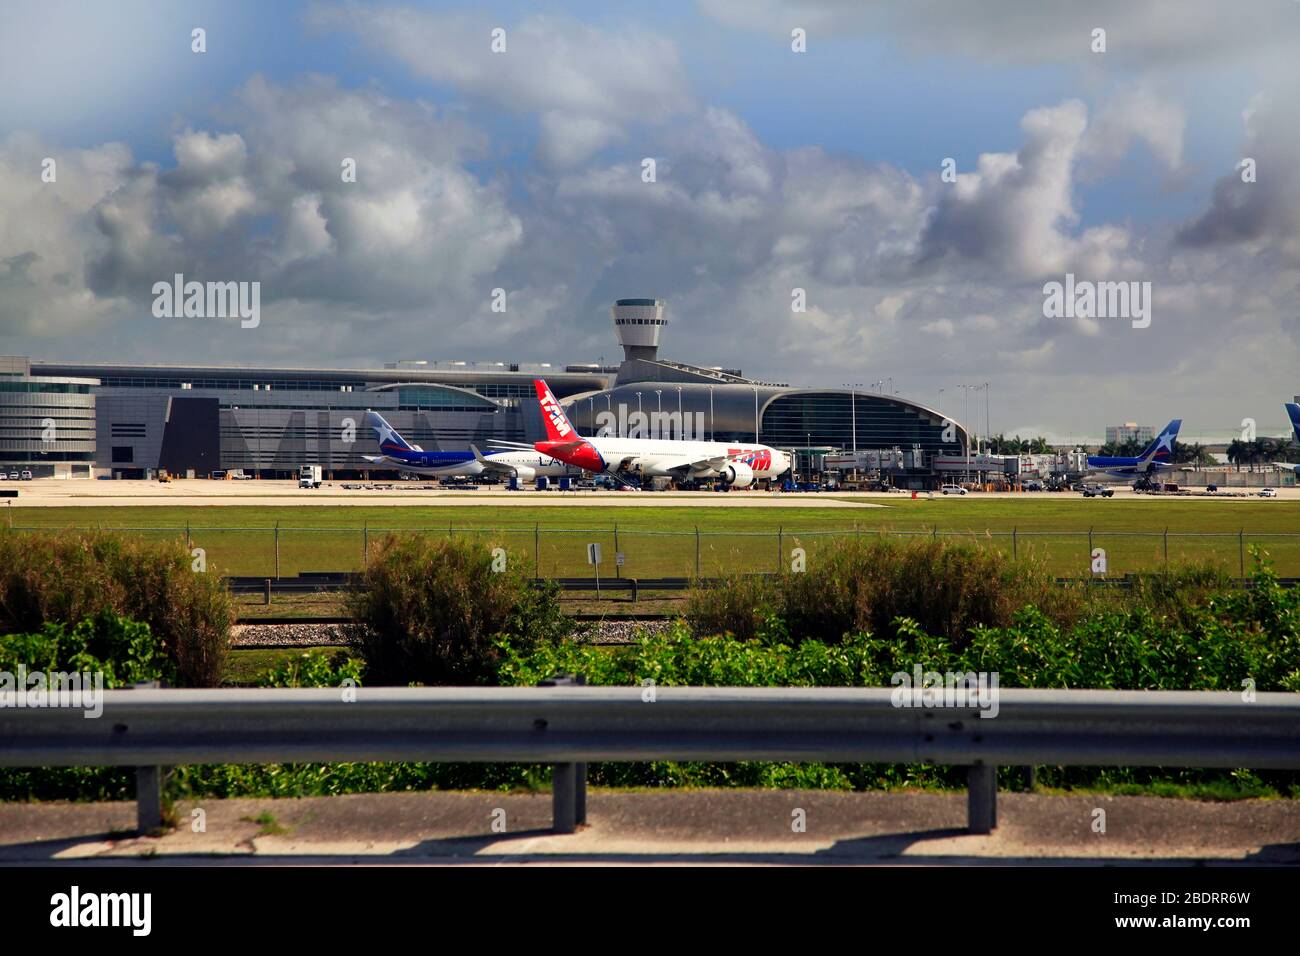 Miami, Florida, USA - May 9, 2013: Panoramic photo of the famous Miami International Airport with lots of airplanes loading and unloading passenger an Stock Photo